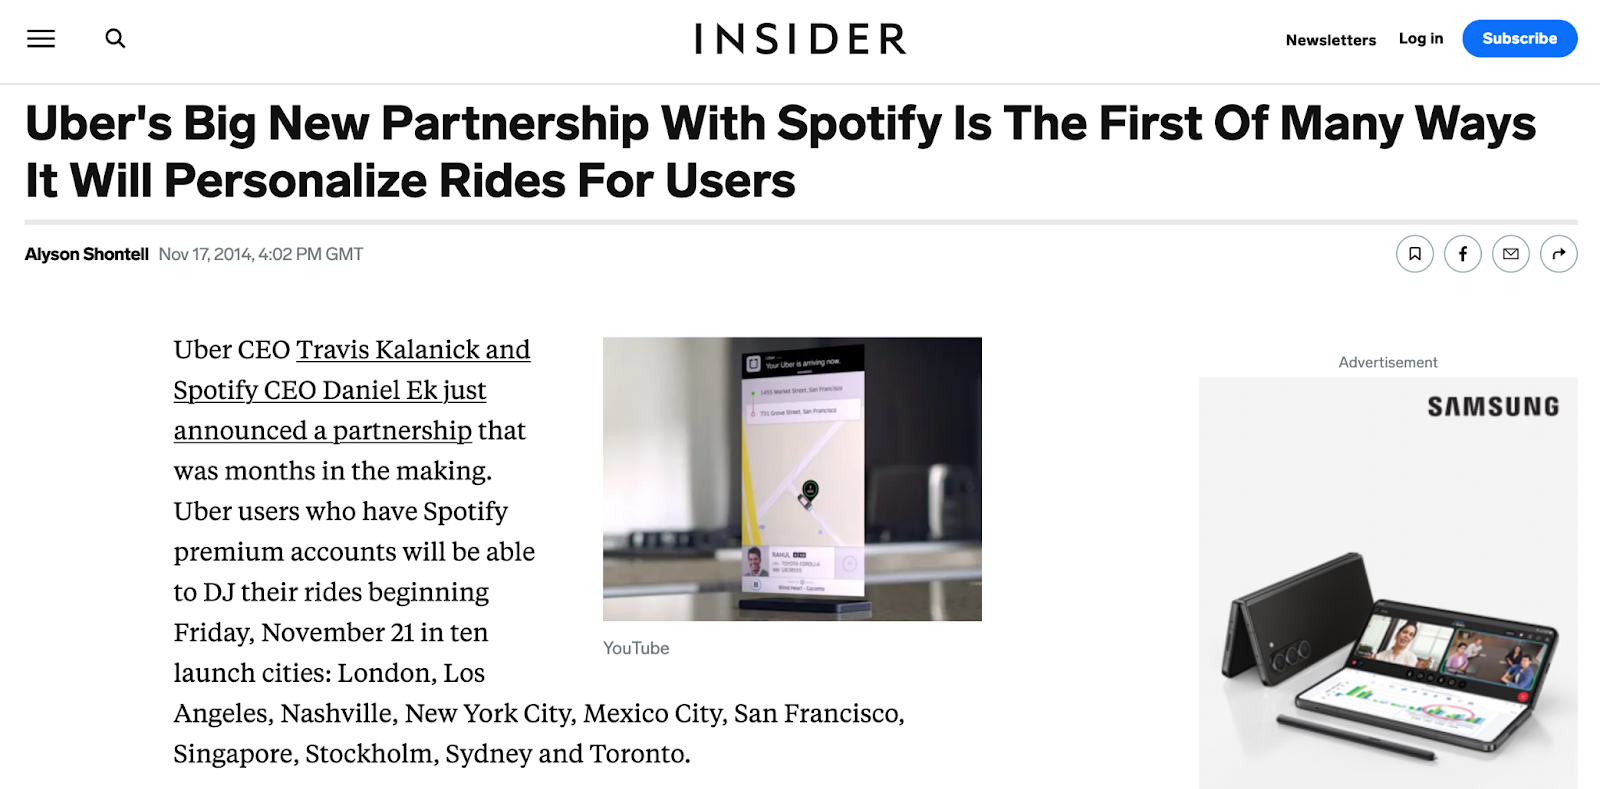 Insider's article about Spotify and Uber